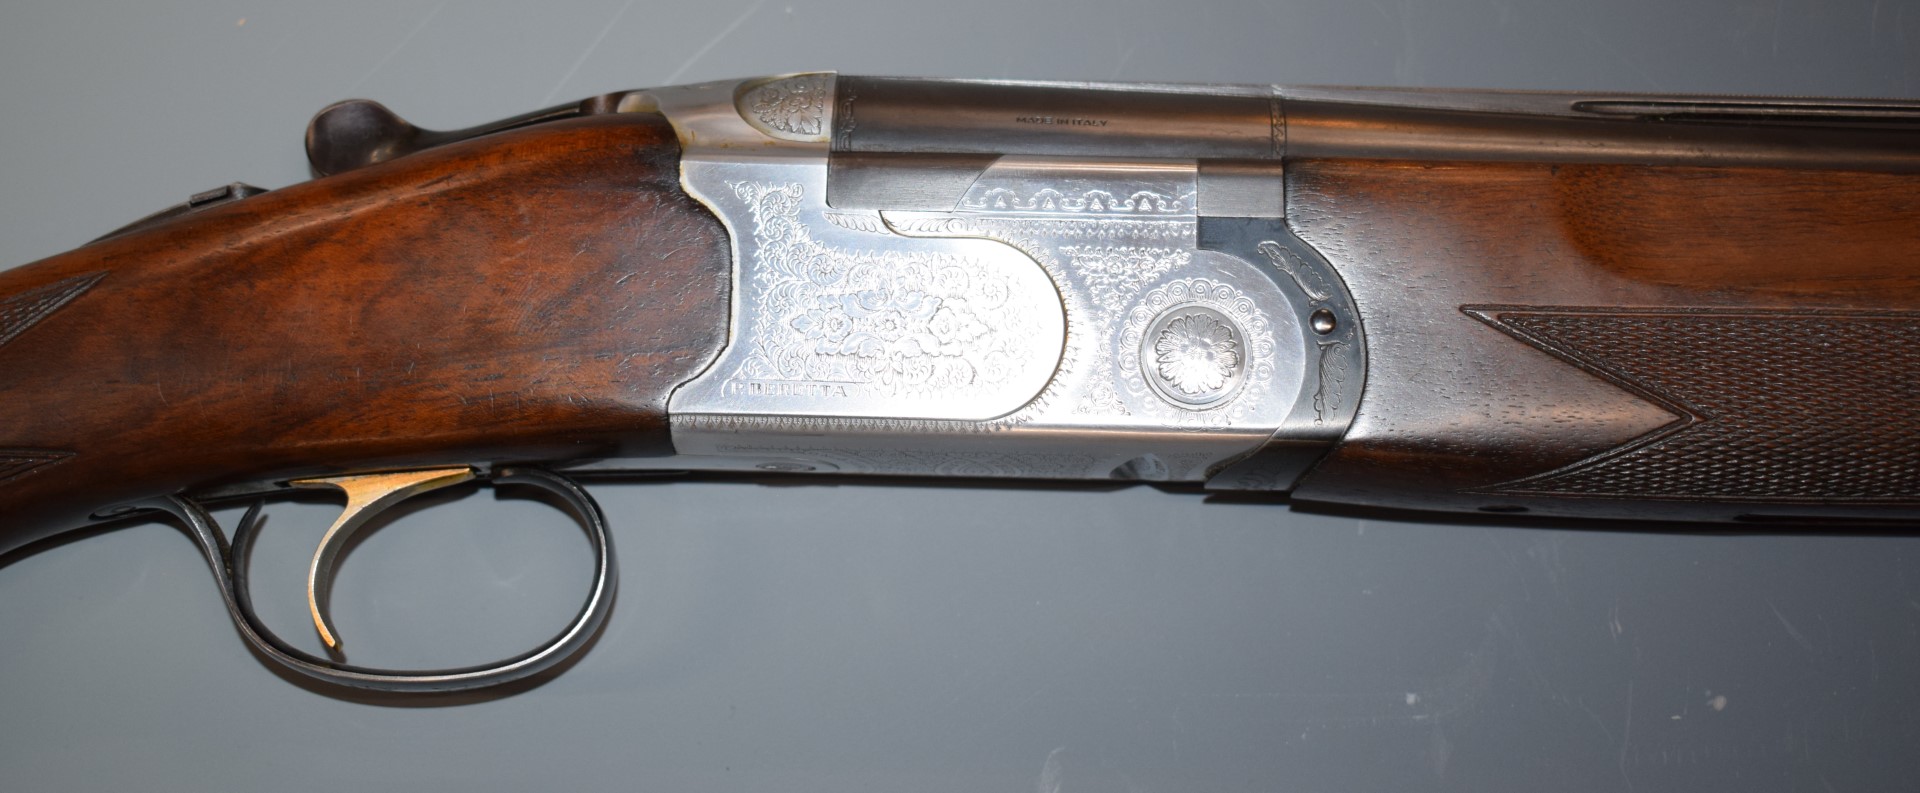 Beretta 686 Special 12 bore over and under ejector shotgun with with all over floral engraving, - Image 6 of 8